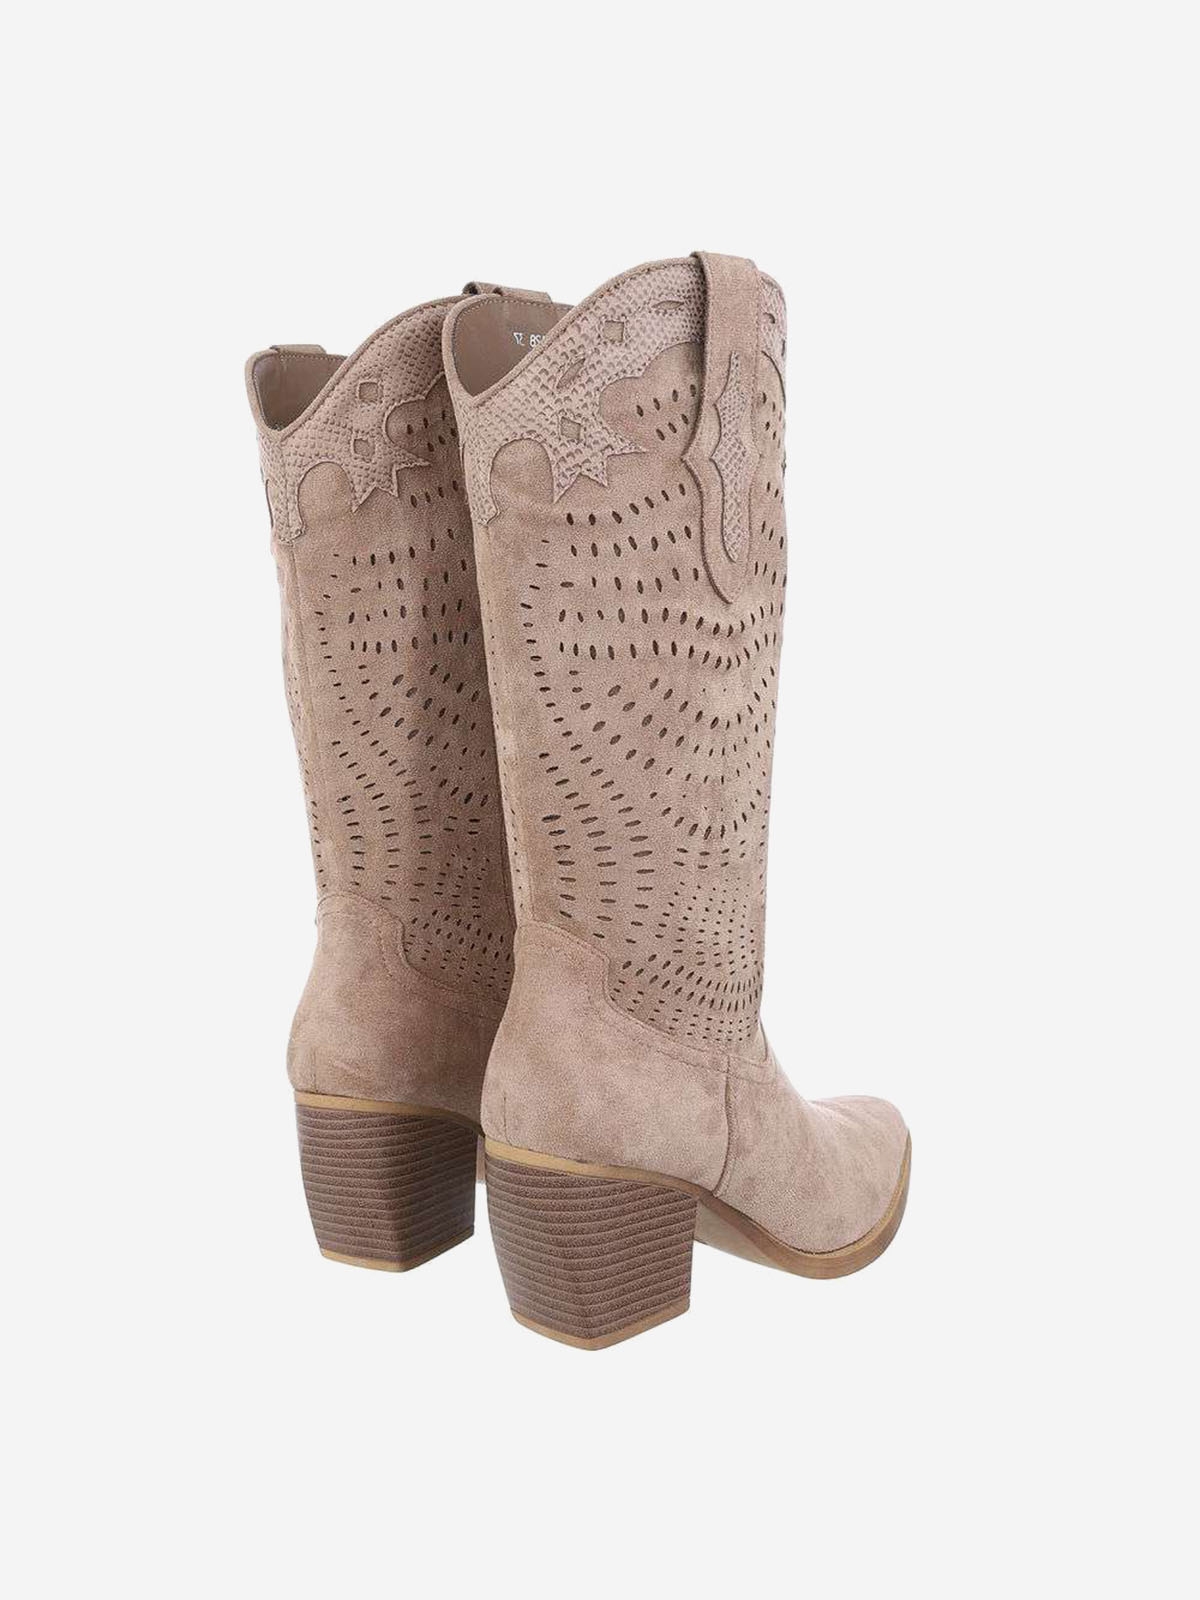 Western style women's high-heeled boots in khaki